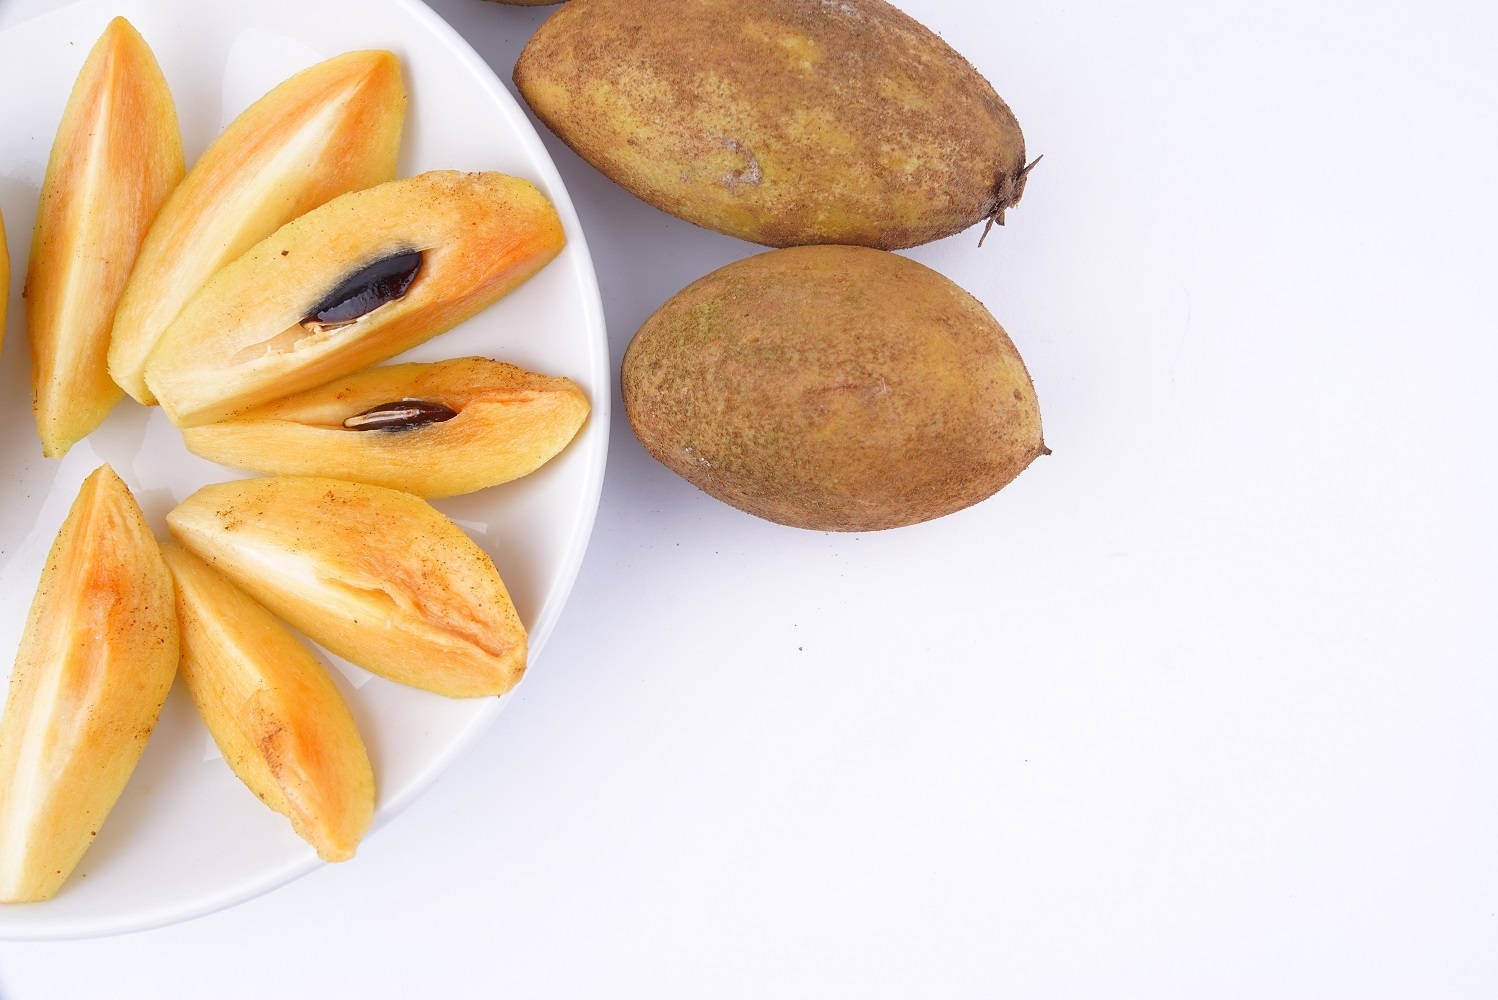 Slices Of Sapodilla Fruits On Plate Wallpaper